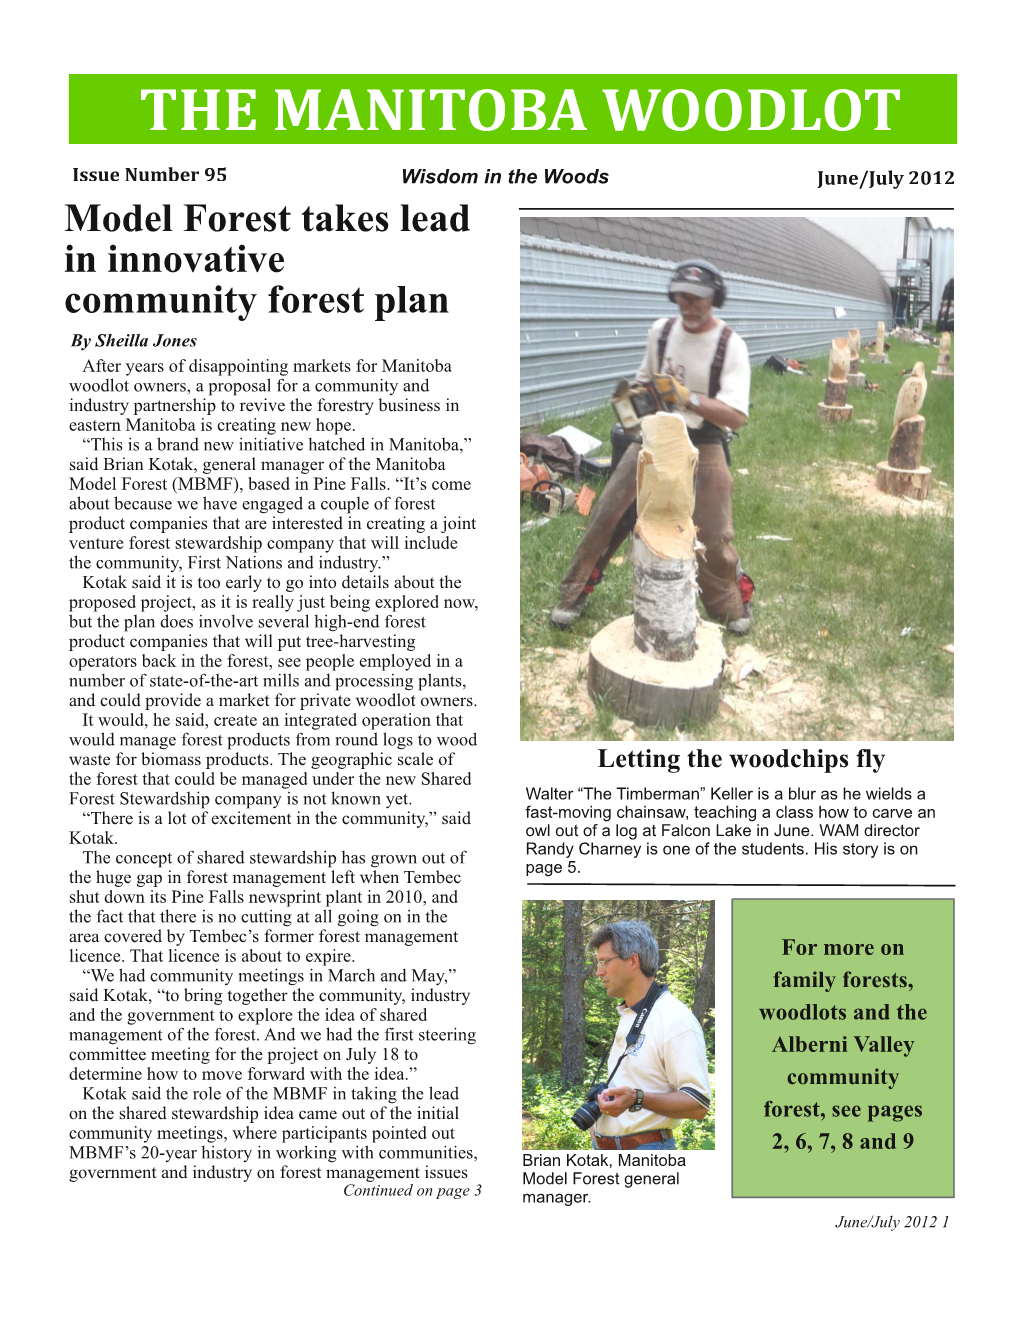 Model Forest Takes Lead in Innovative Community Forest Plan